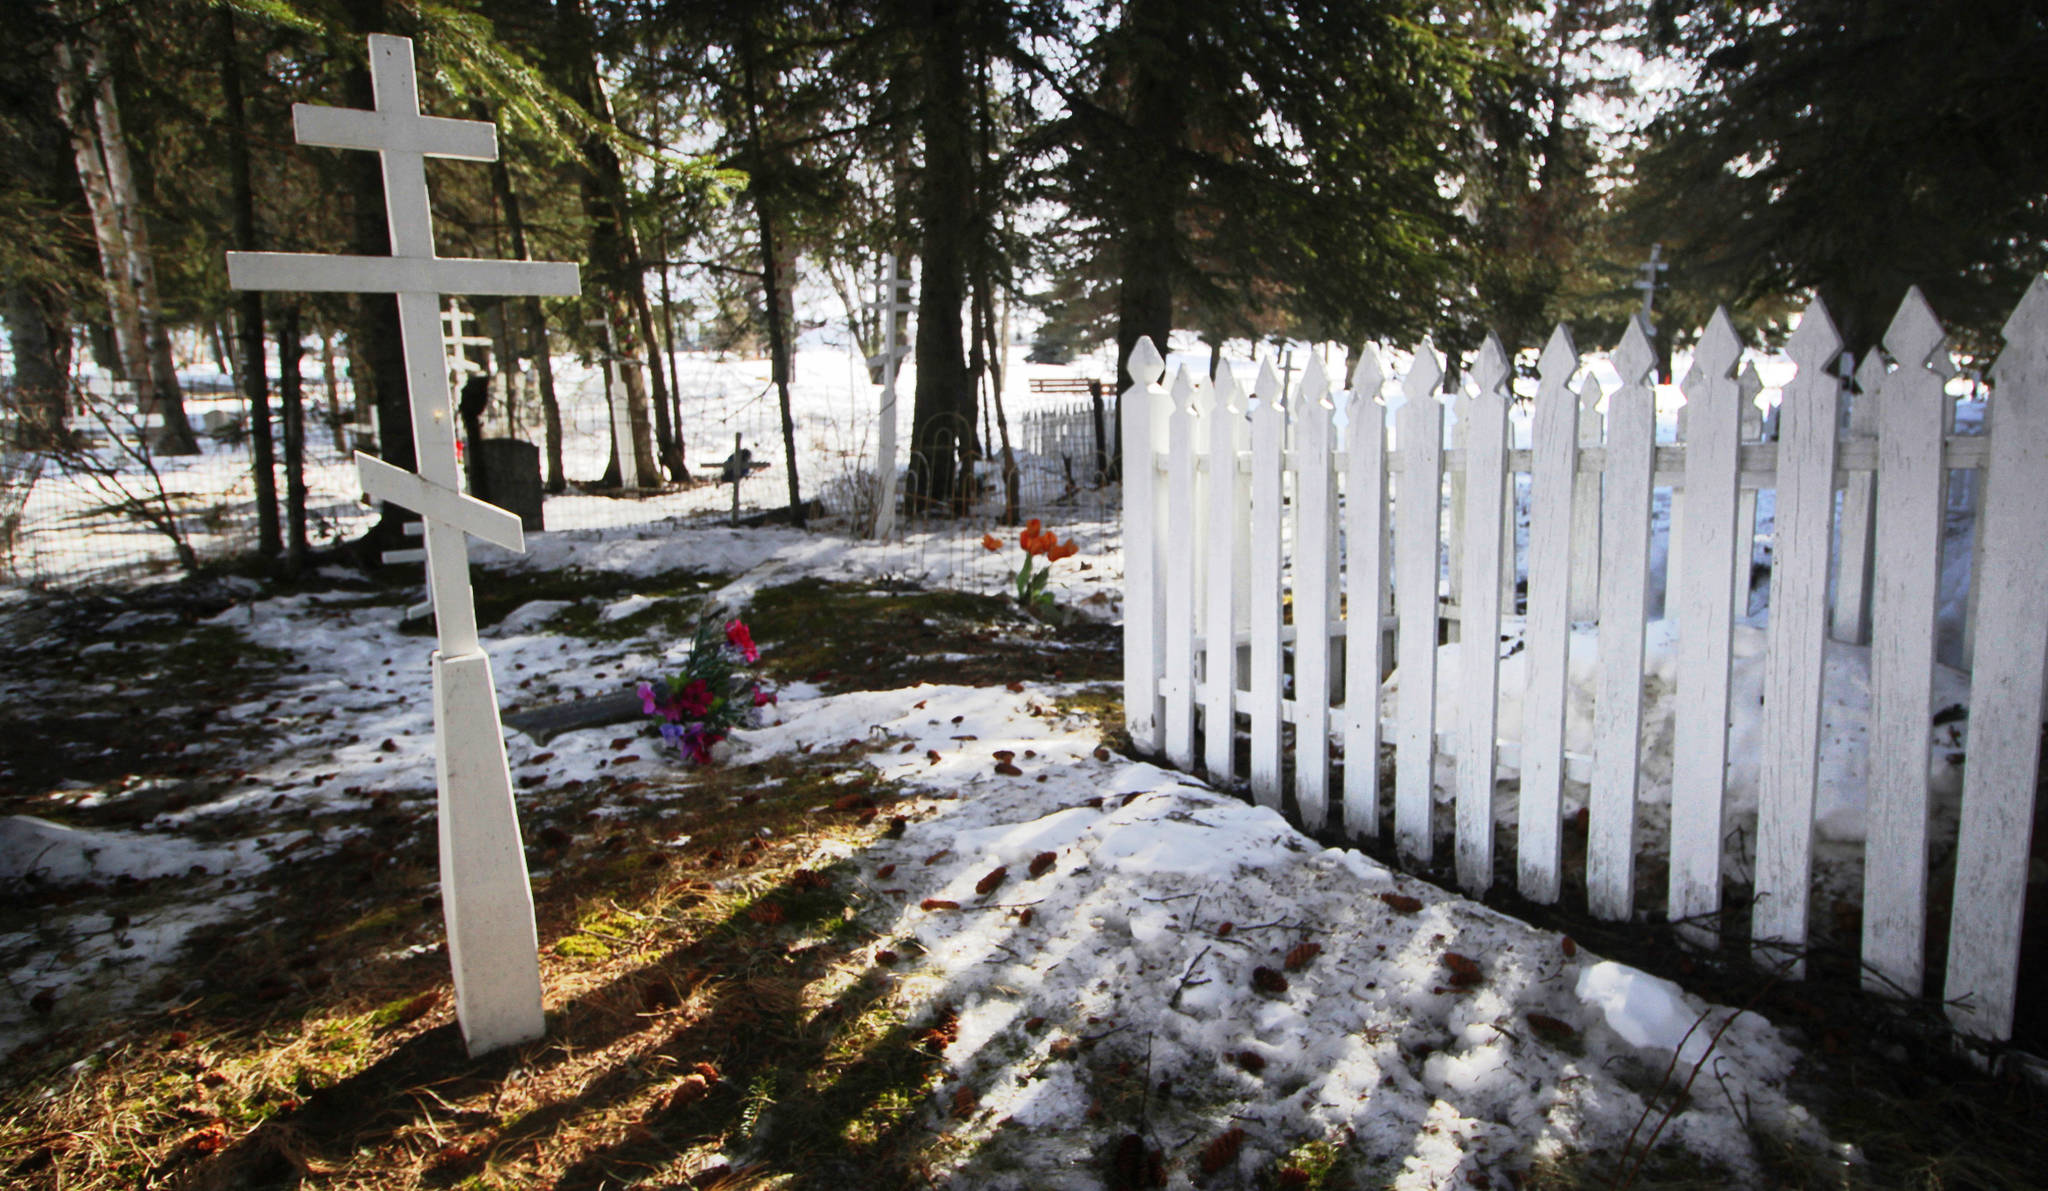 As burial space decreases in Kenai’s cemetery — pictured here on March 17, 2017 — the Kenai City Council is taking steps on a long-planned expansion. On Wednesday council members voted unanomously to fund engineering plans for converting the vacant lot adjacent to the existing cemetery across Floatplane Road into new cemetery grounds. Construction of the expansion may begin this year. (Ben Boettger/Peninsula Clarion)